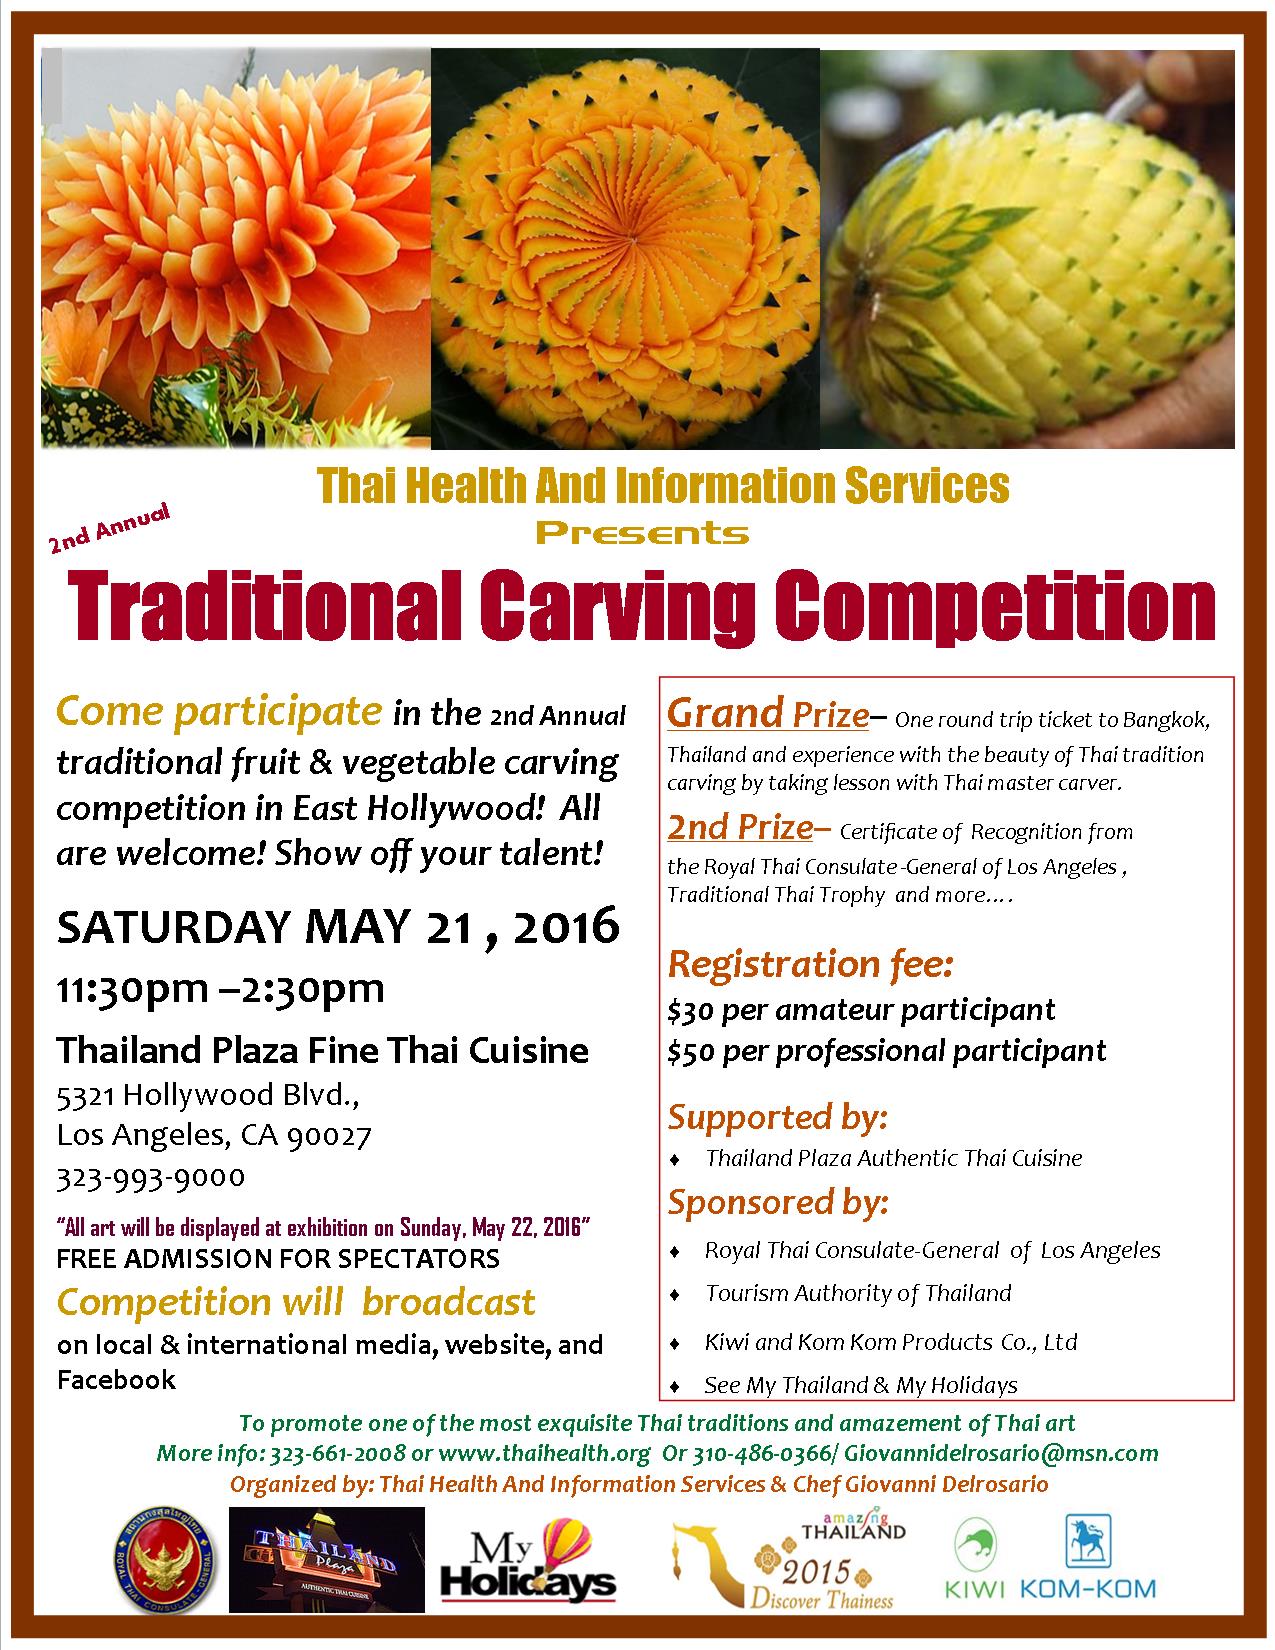 2nd Annual Traditional Carving Competition Flier